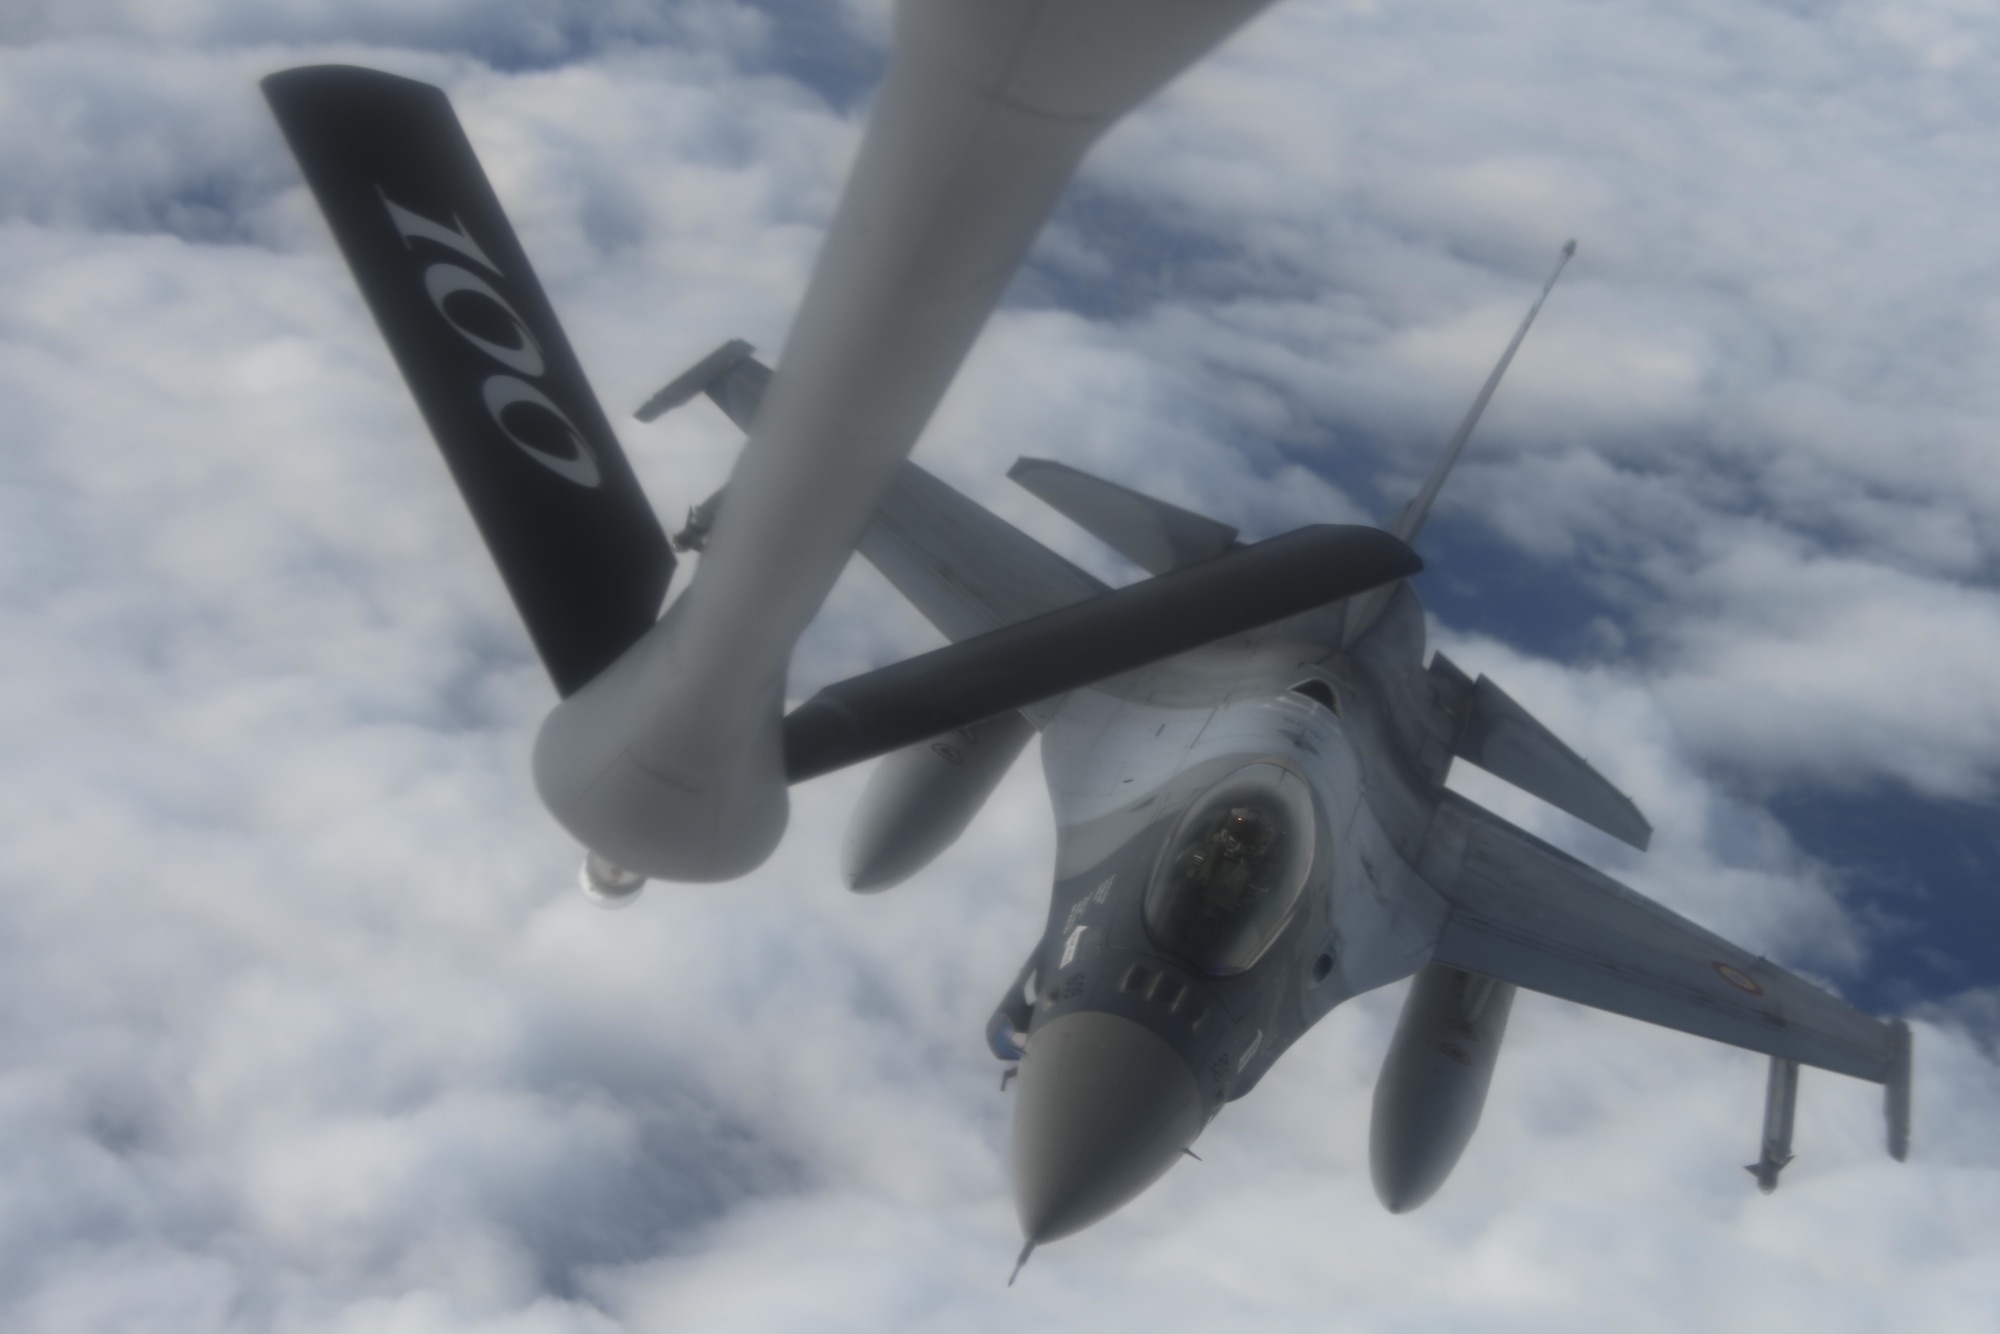 A Romanian air force F-16 Fighting Falcon aircraft approaches a U.S. Air Force KC-135 Stratotanker aircraft assigned to the 100th Air Refueling Wing, Royal Air Force Mildenhall, England, to receive fuel over Romania Oct. 7, 2021. The 100th ARW is the only permanent U.S. air refueling wing in the European theater, providing the critical air refueling "bridge" which allows the expeditionary Air Force to deploy around the globe at a moment's notice. (U.S. Air Force photo by Senior Airman Joseph Barron)